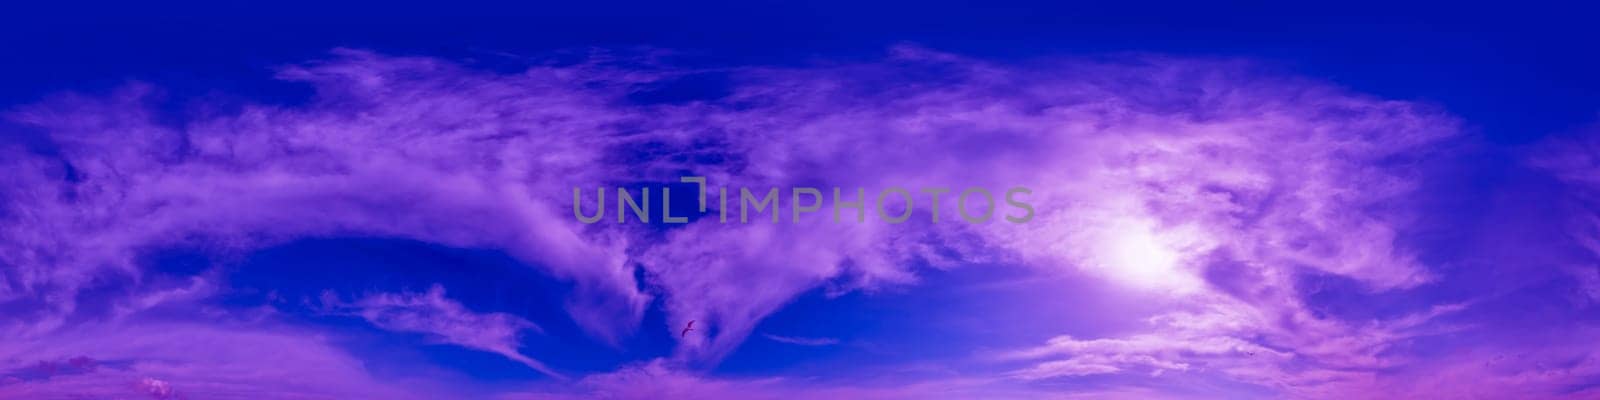 Blue magenta sky panorama with Cirrus clouds in Seamless spherical equirectangular format. Full zenith for use in 3D graphics, game and editing aerial drone 360 degree panoramas for sky replacement.